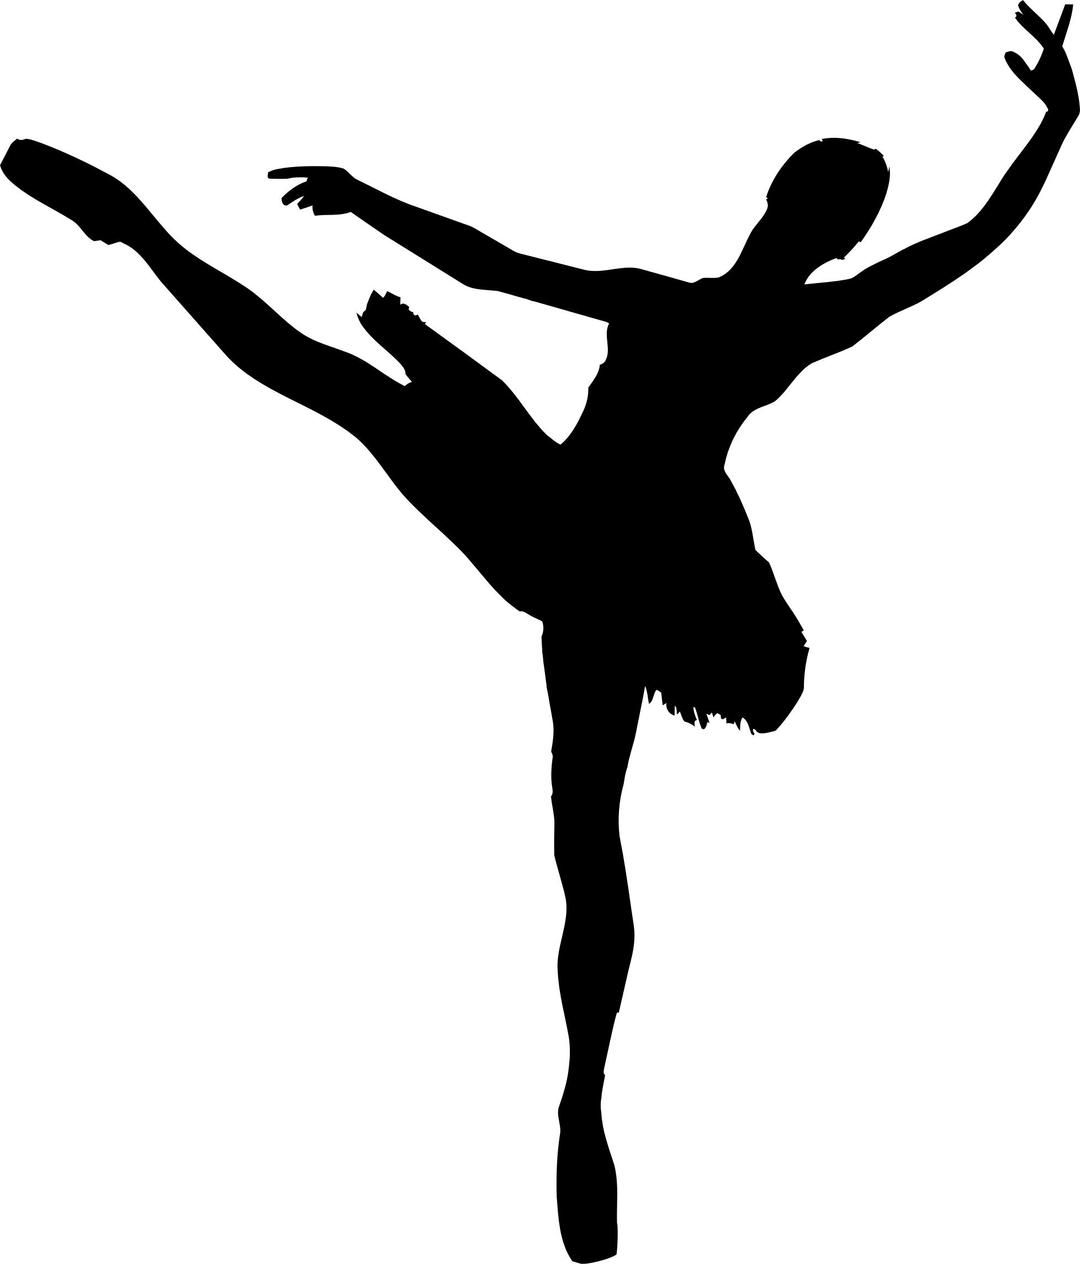 Woman And Man Ballet Silhouette Minus Man png transparent